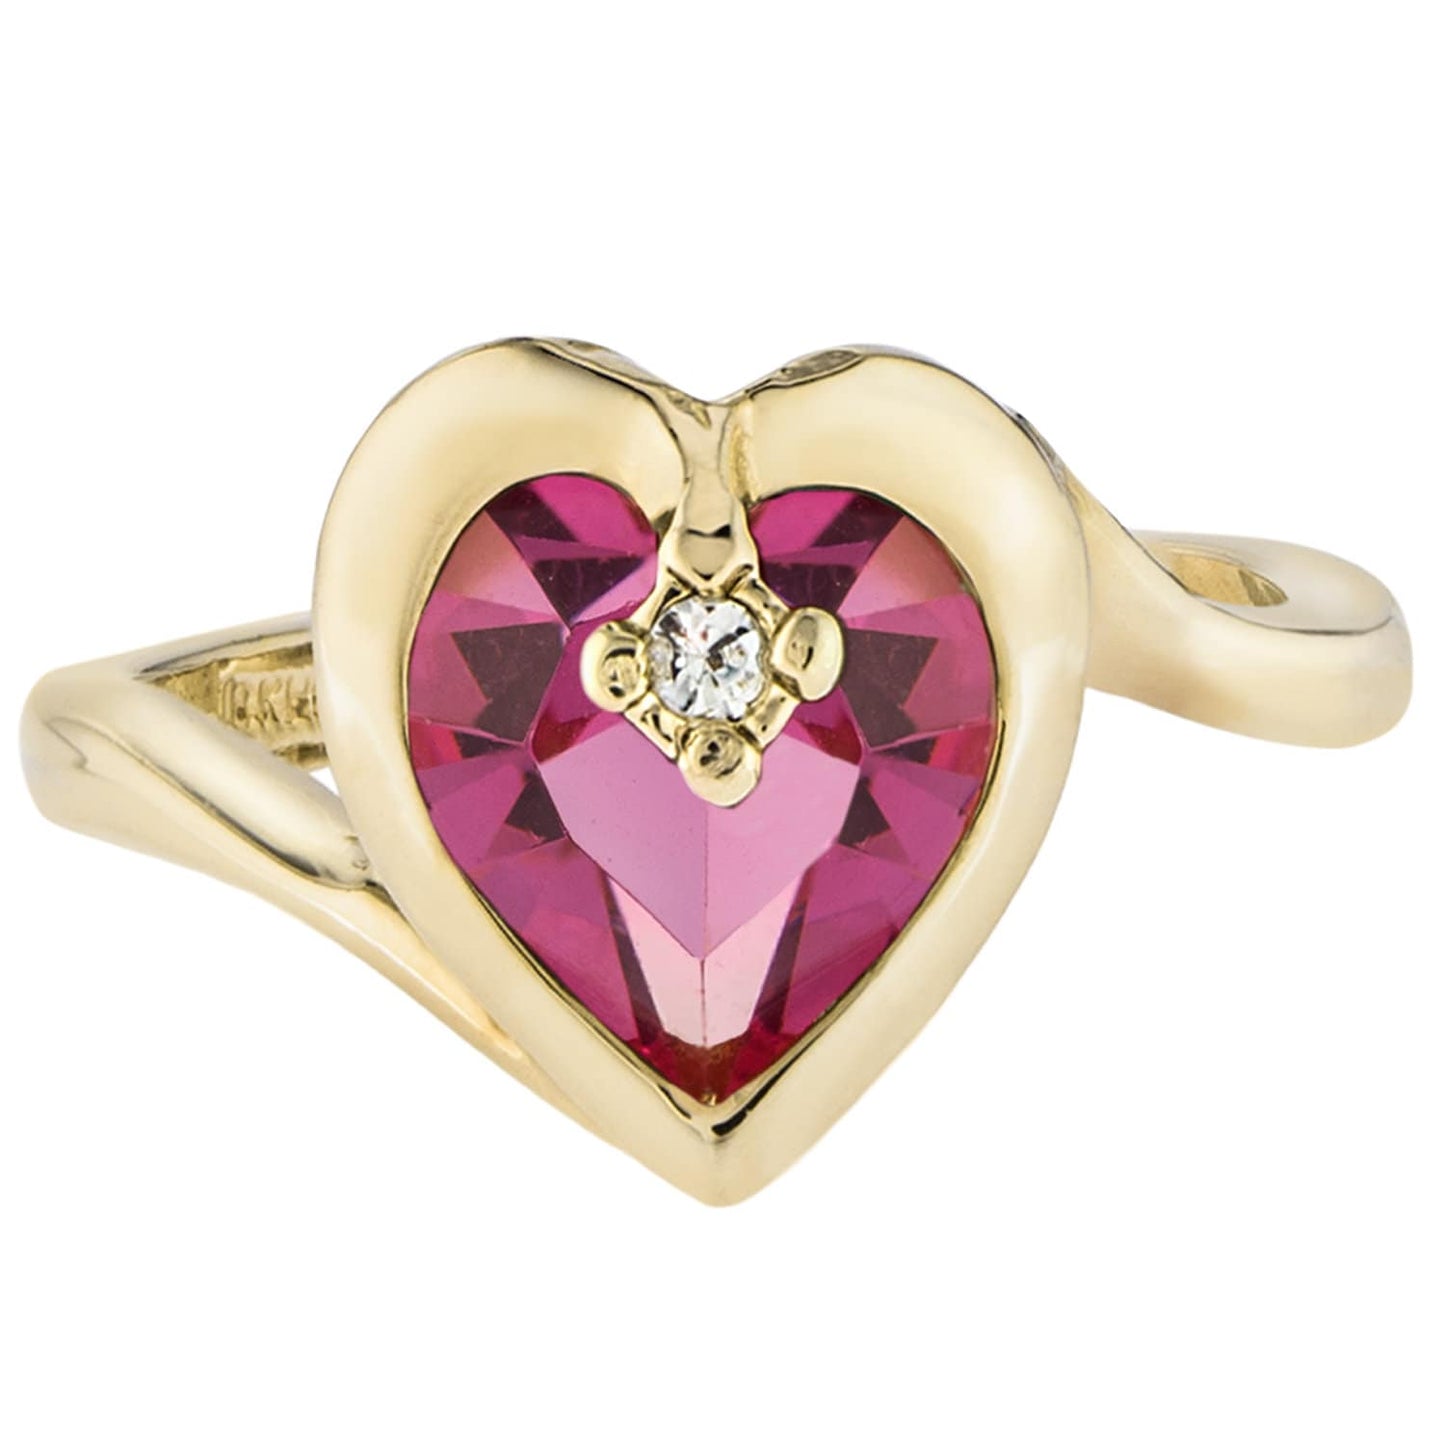 Vintage Ring 1970s Heart Shape Ring Pink Tourmaline Swarovski Crystal 18k Gold Womans Promise Jewelry #R1400 - Limited Stock - Never Worn